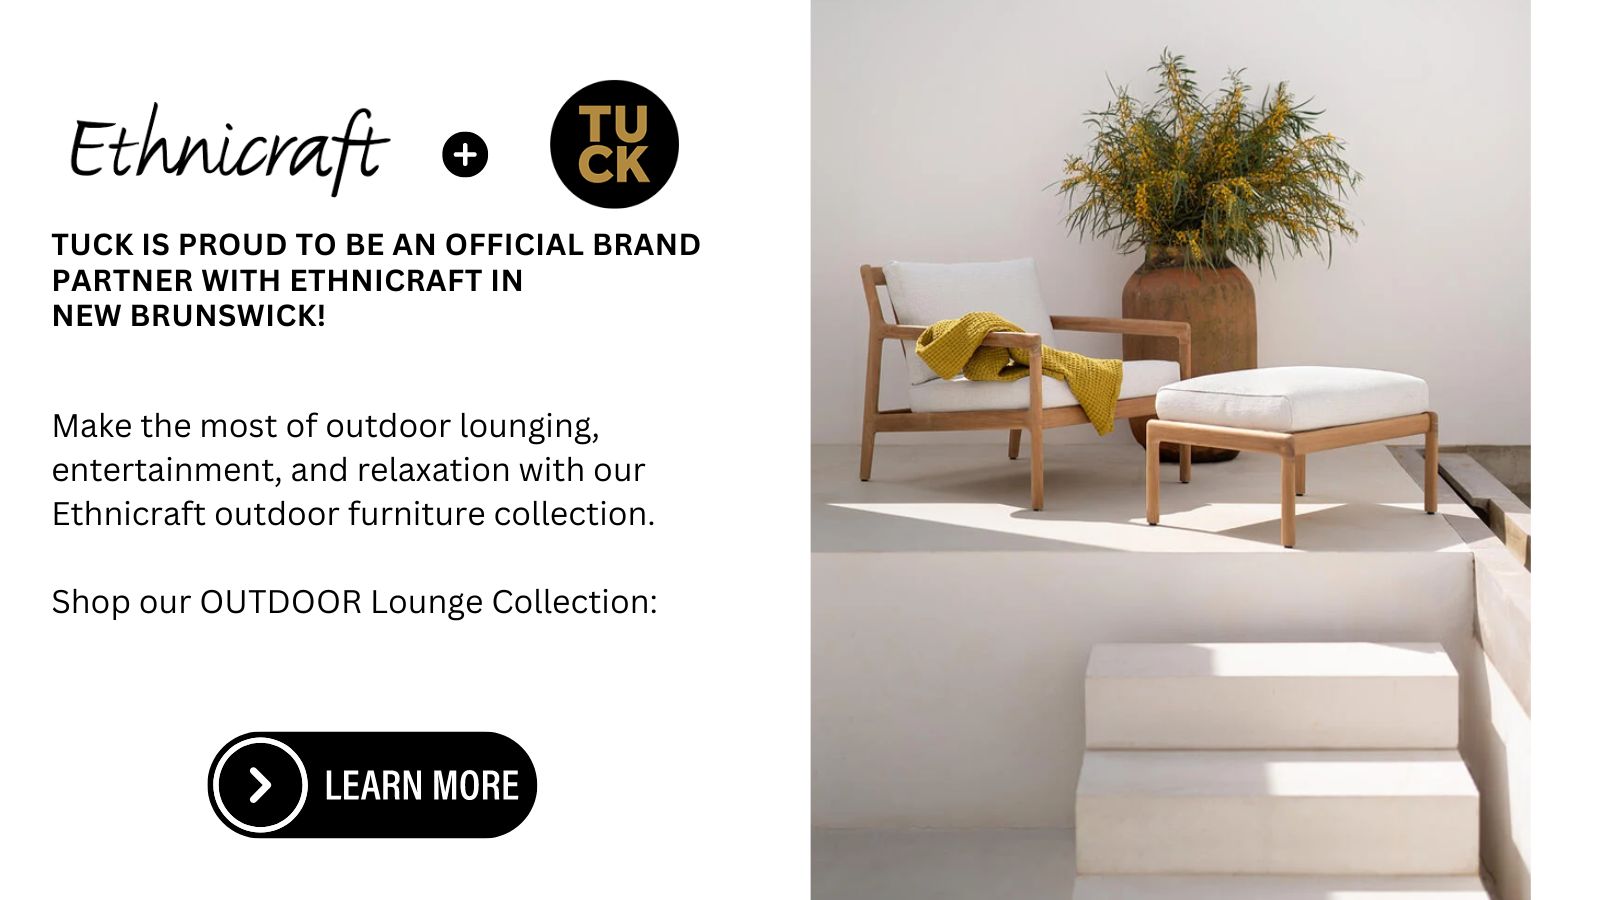 Tuck is proud to represent Ethnicraft Outdoor Lounge!